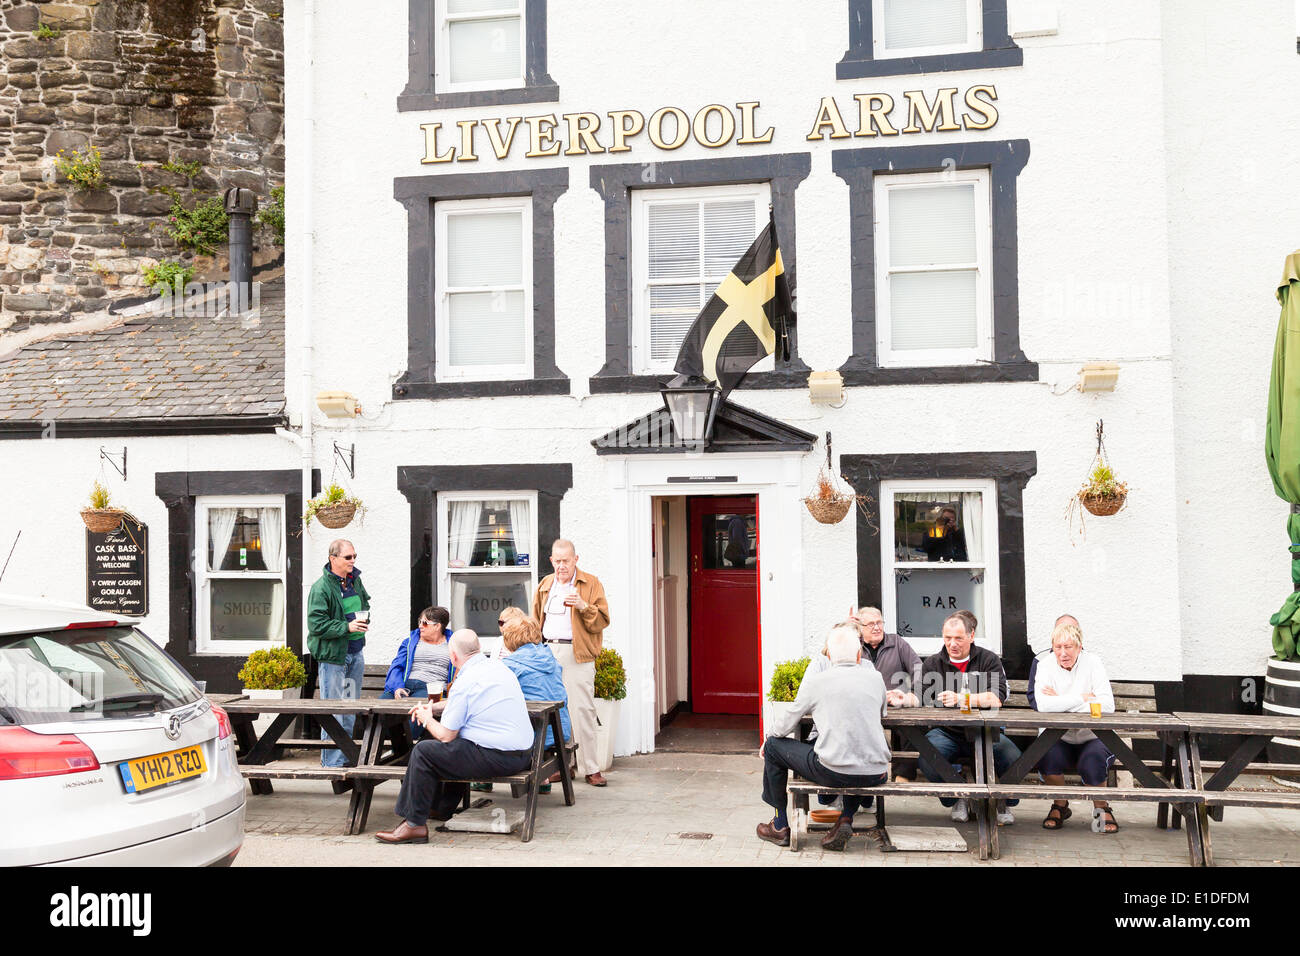 People  drinking  outside pub, The Liverpool  Arms, Conway, Wales Great Britain Stock Photo